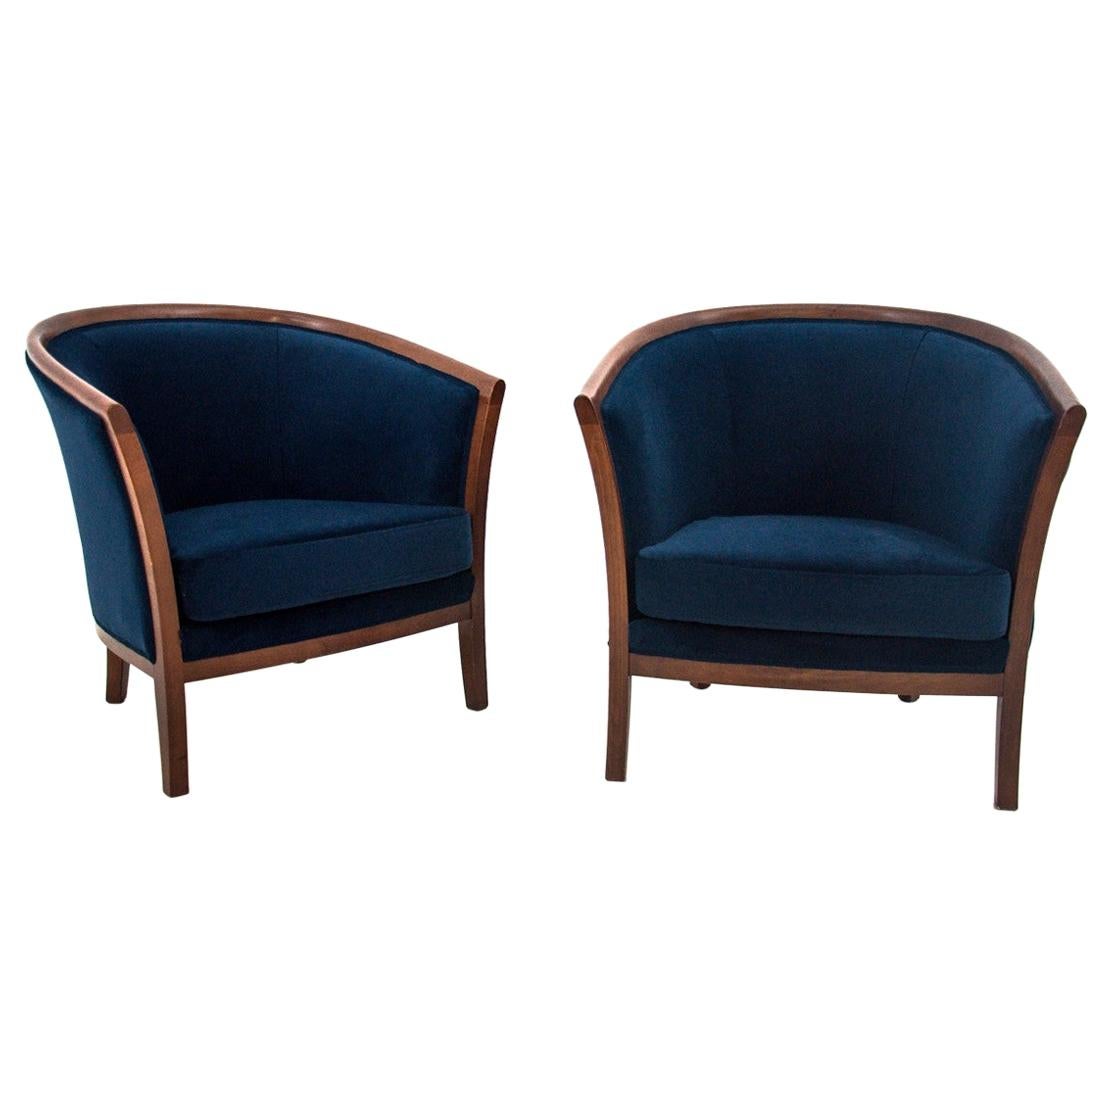 Two Louis Phillipe Bergère Armchairs, Northern Europe, circa 1900, Renovated